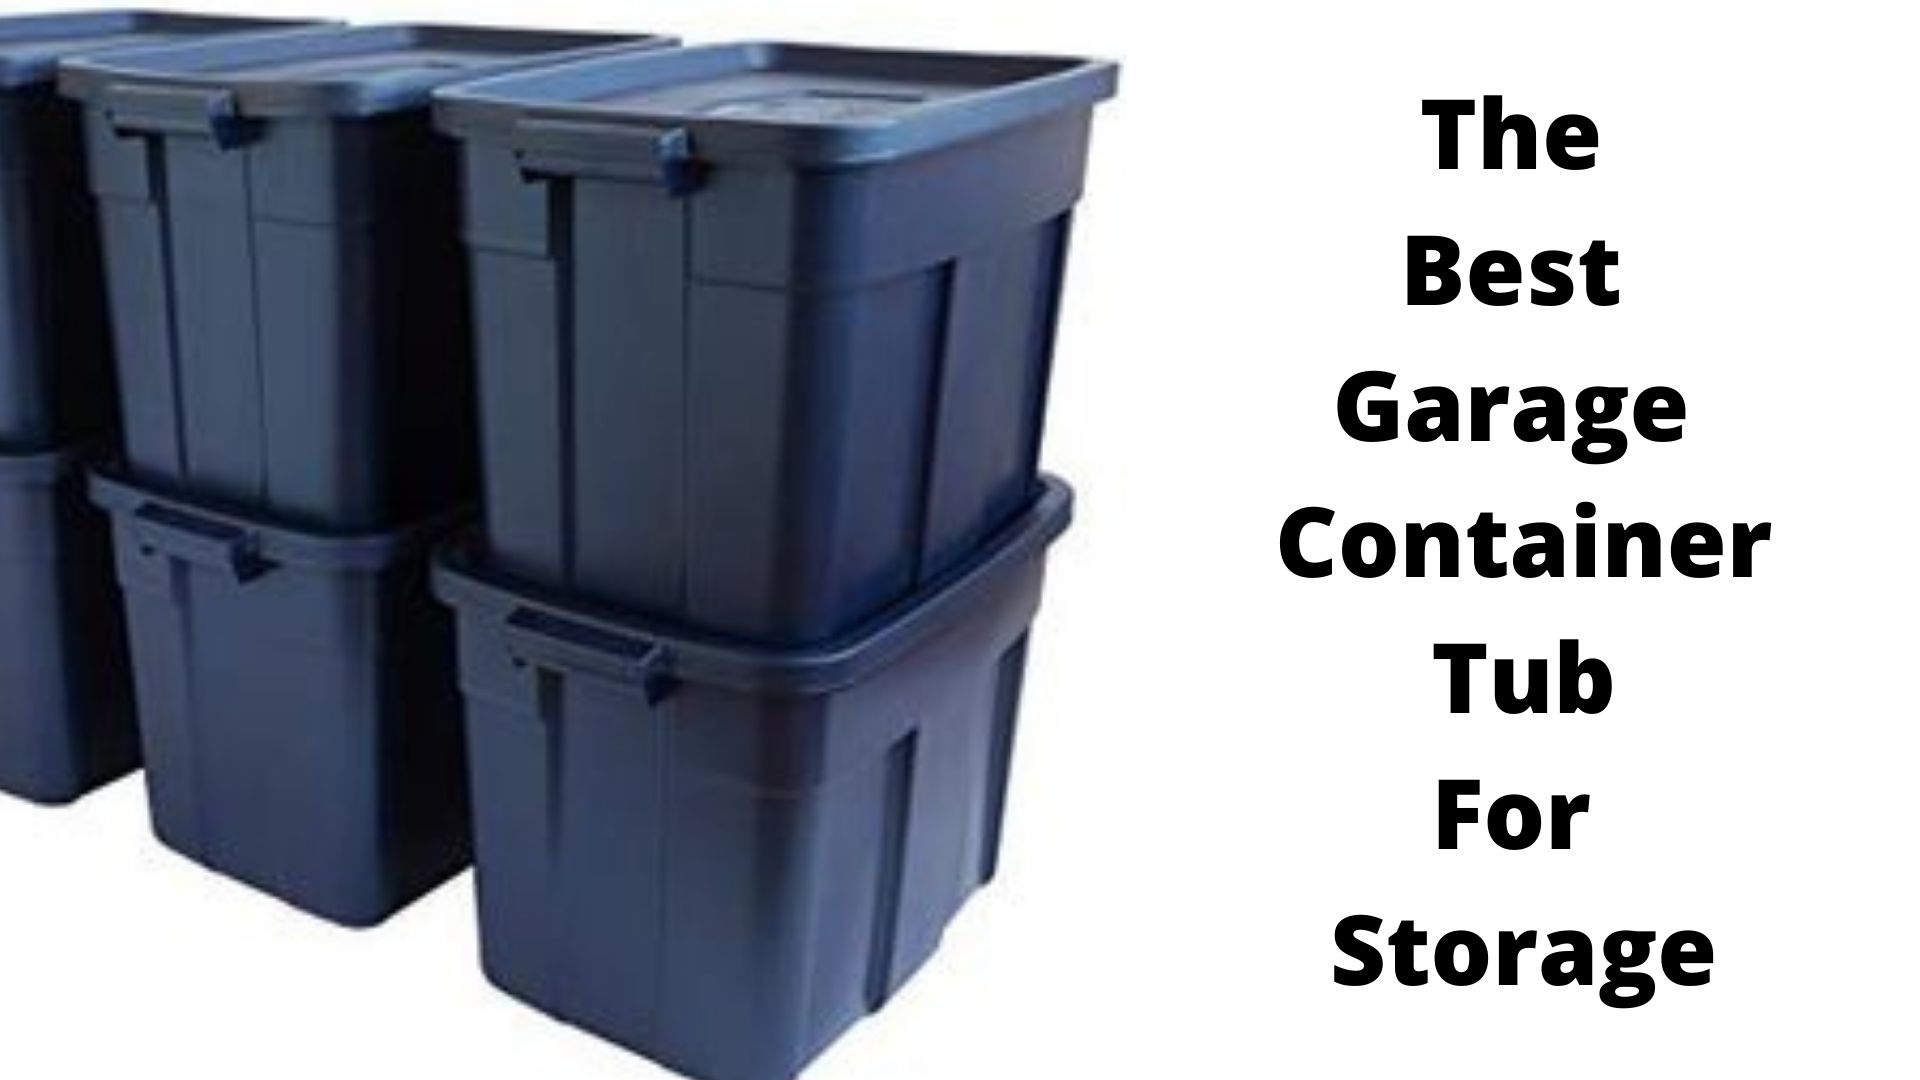 The Best Garage Container Tub For Storage